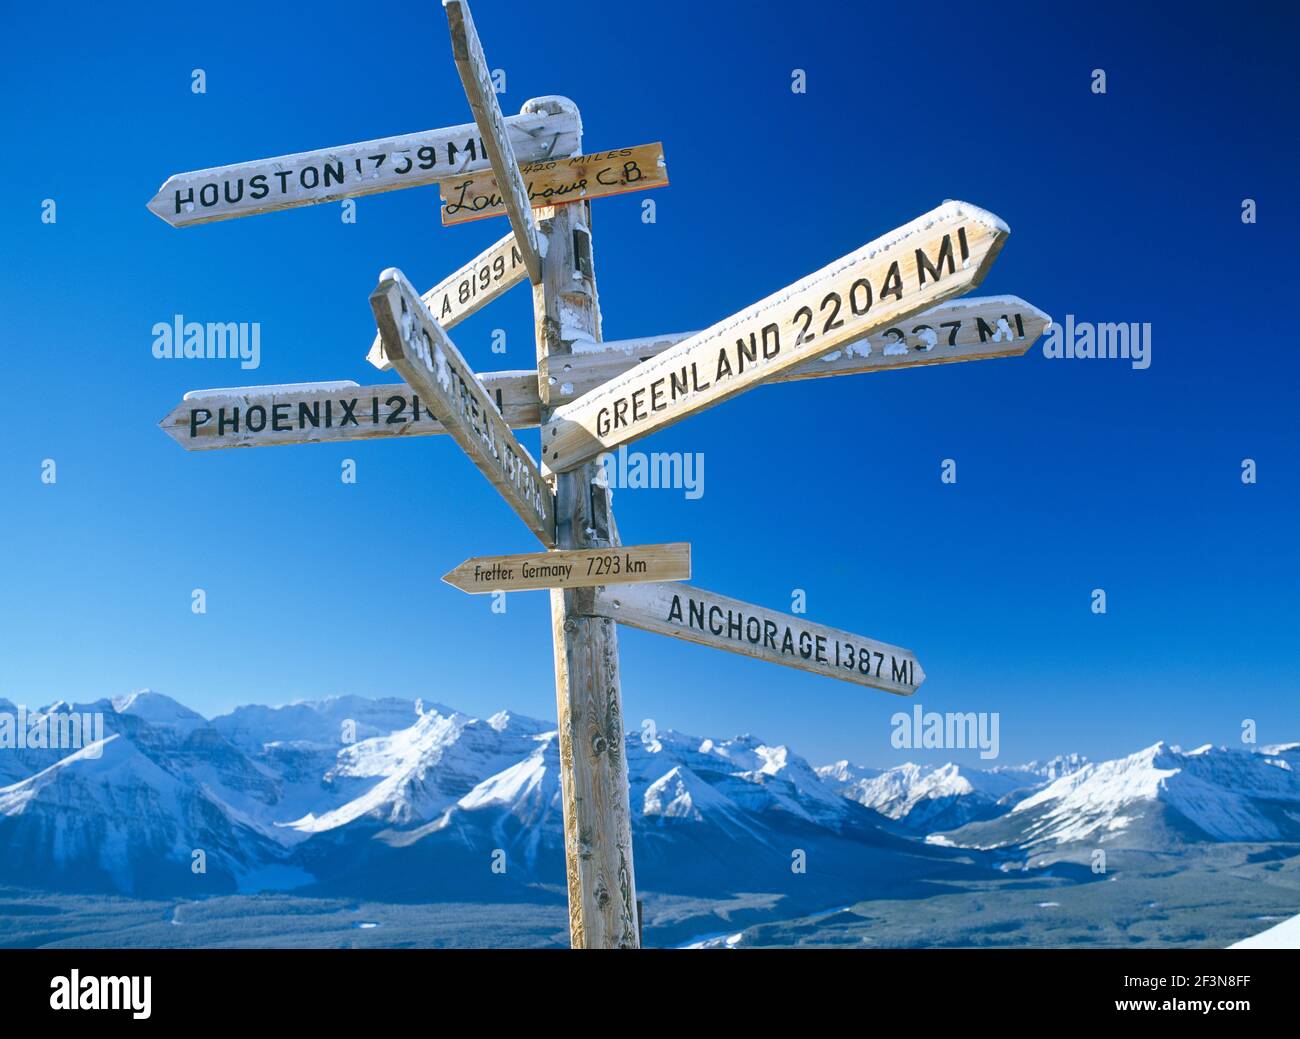 The Top of the World Chair chair lift ride up to the mountain top of the winter sports resort at Lake Louise has a signpost with names and distances o Stock Photo